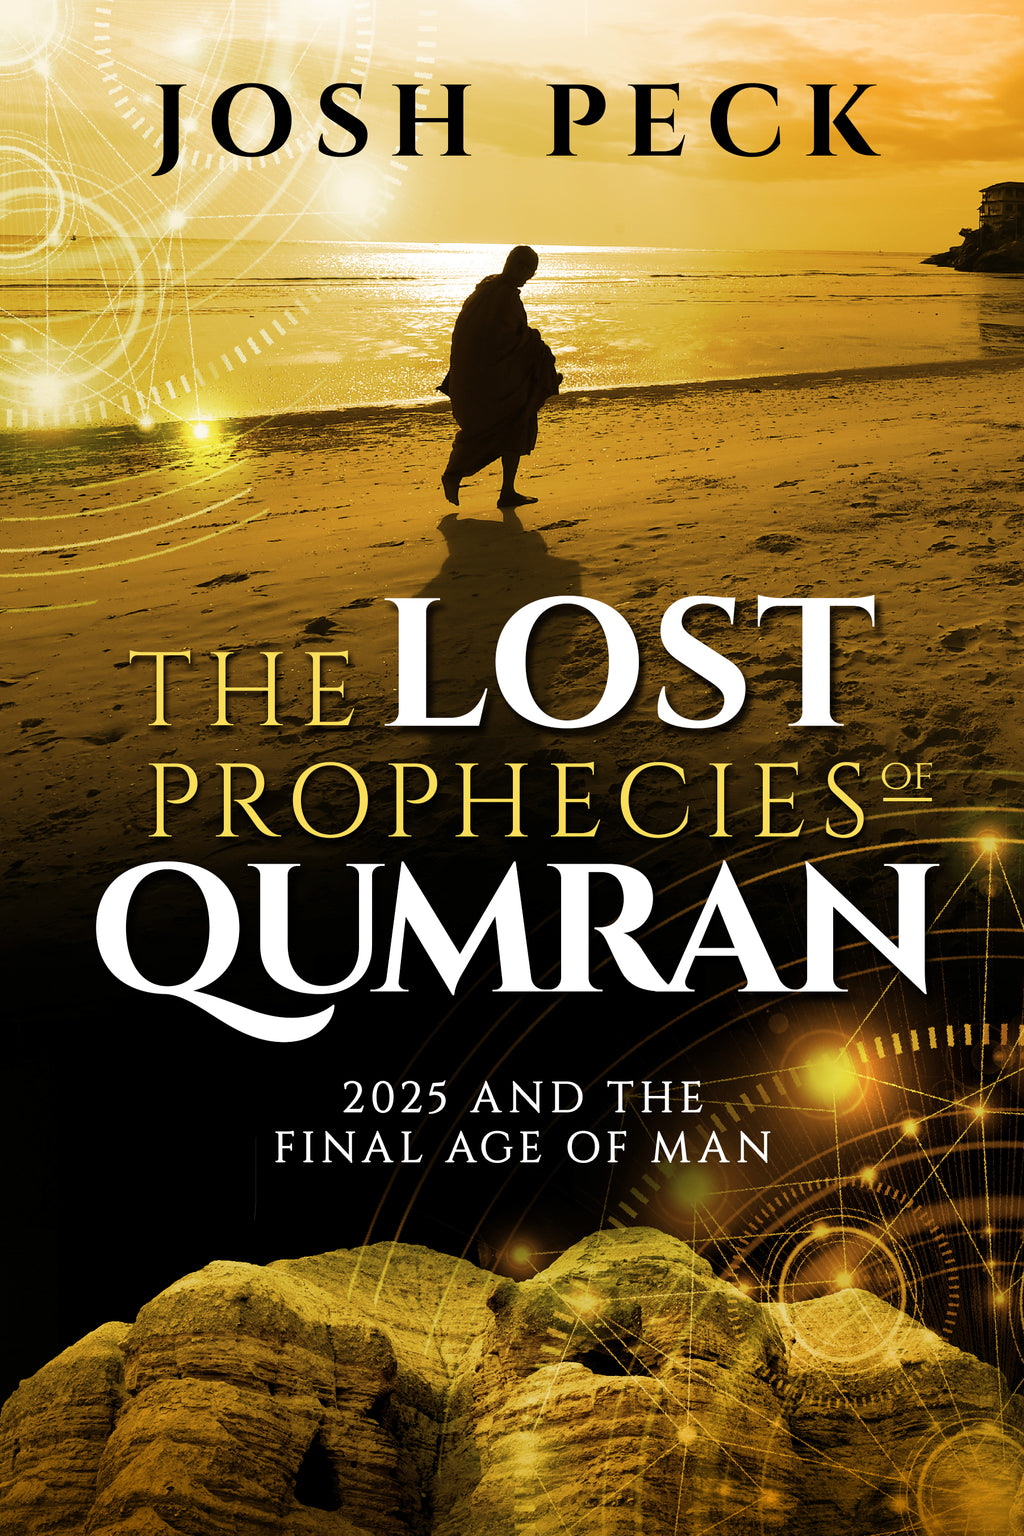 The Lost Prophecies of Qumran:2025 and the Final Age of Man